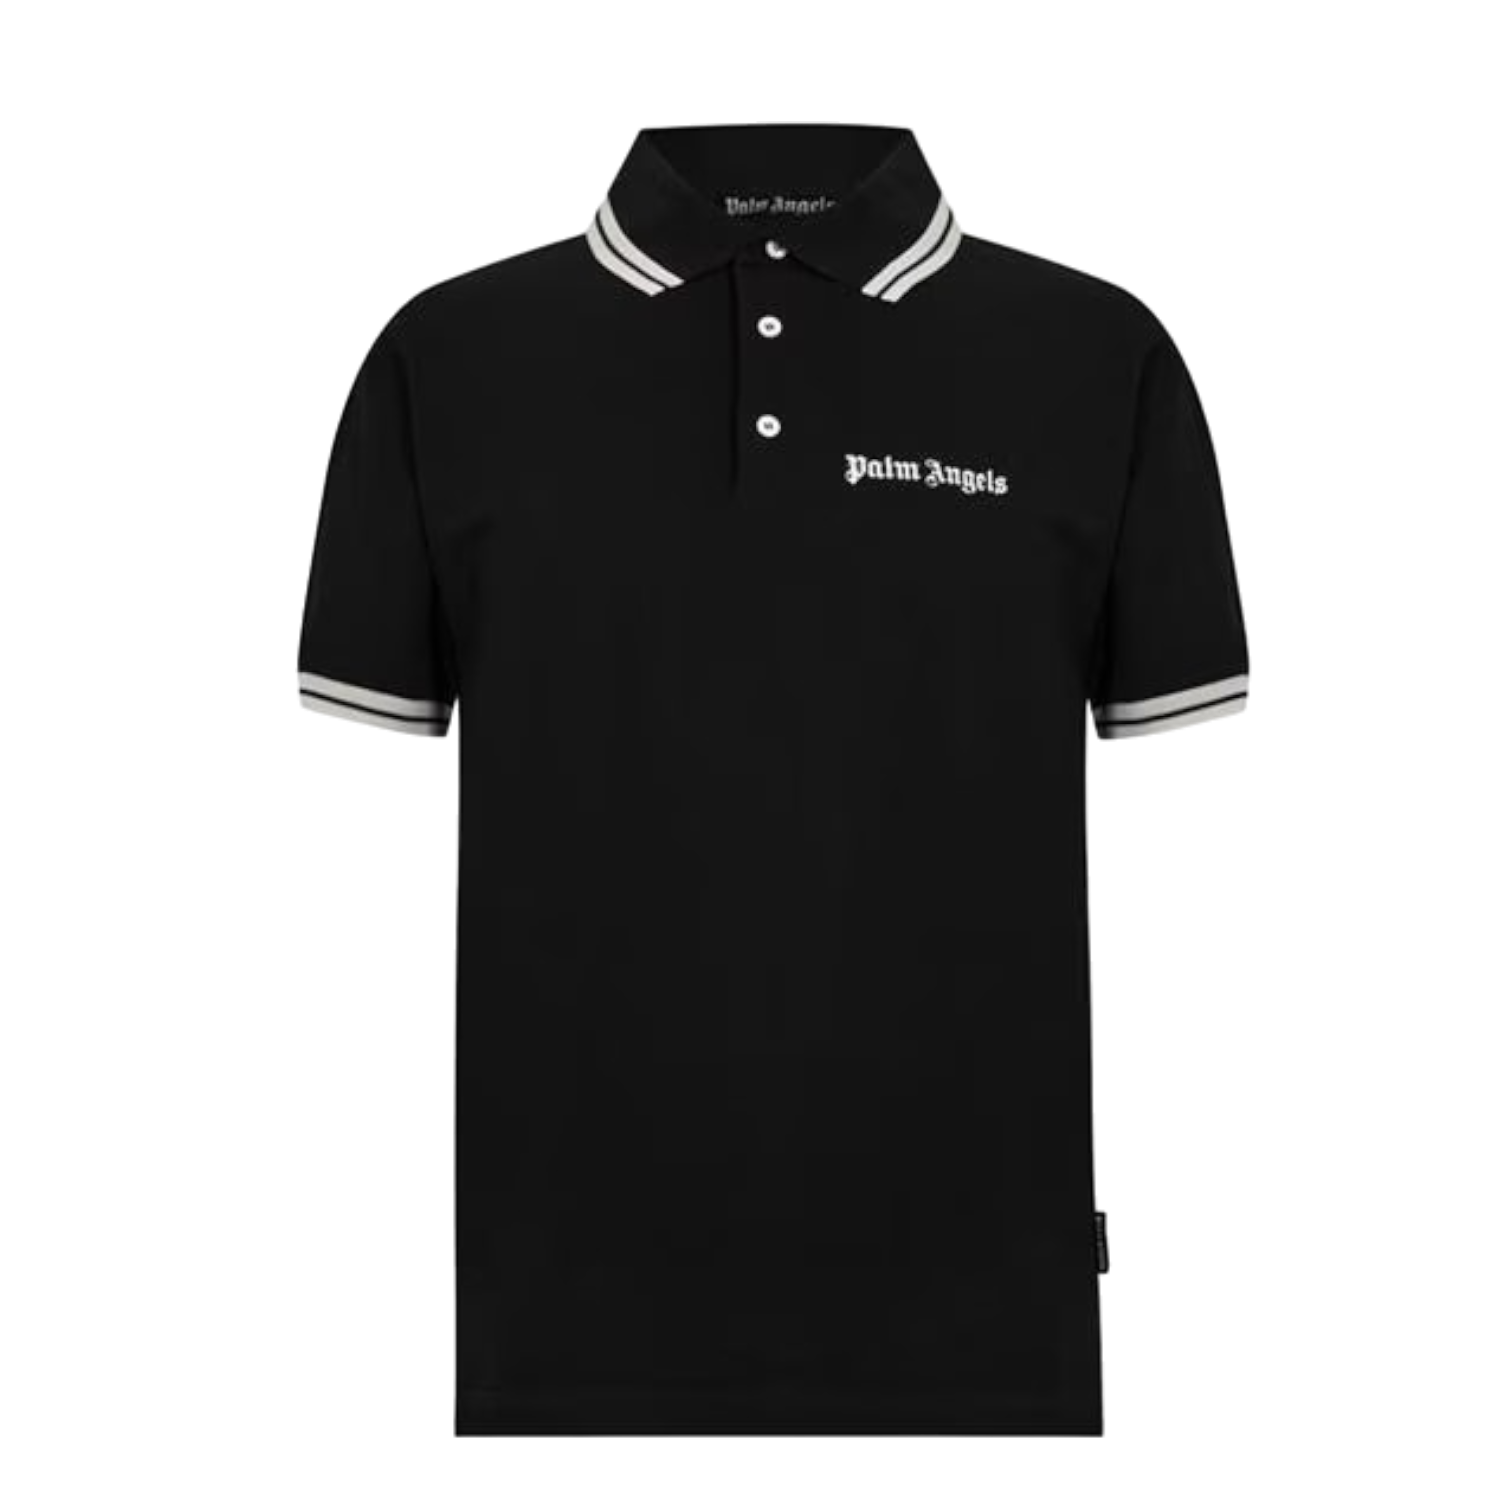 LUXURY HUB PALM ANGELS EMBROIDERED LOGO POLO